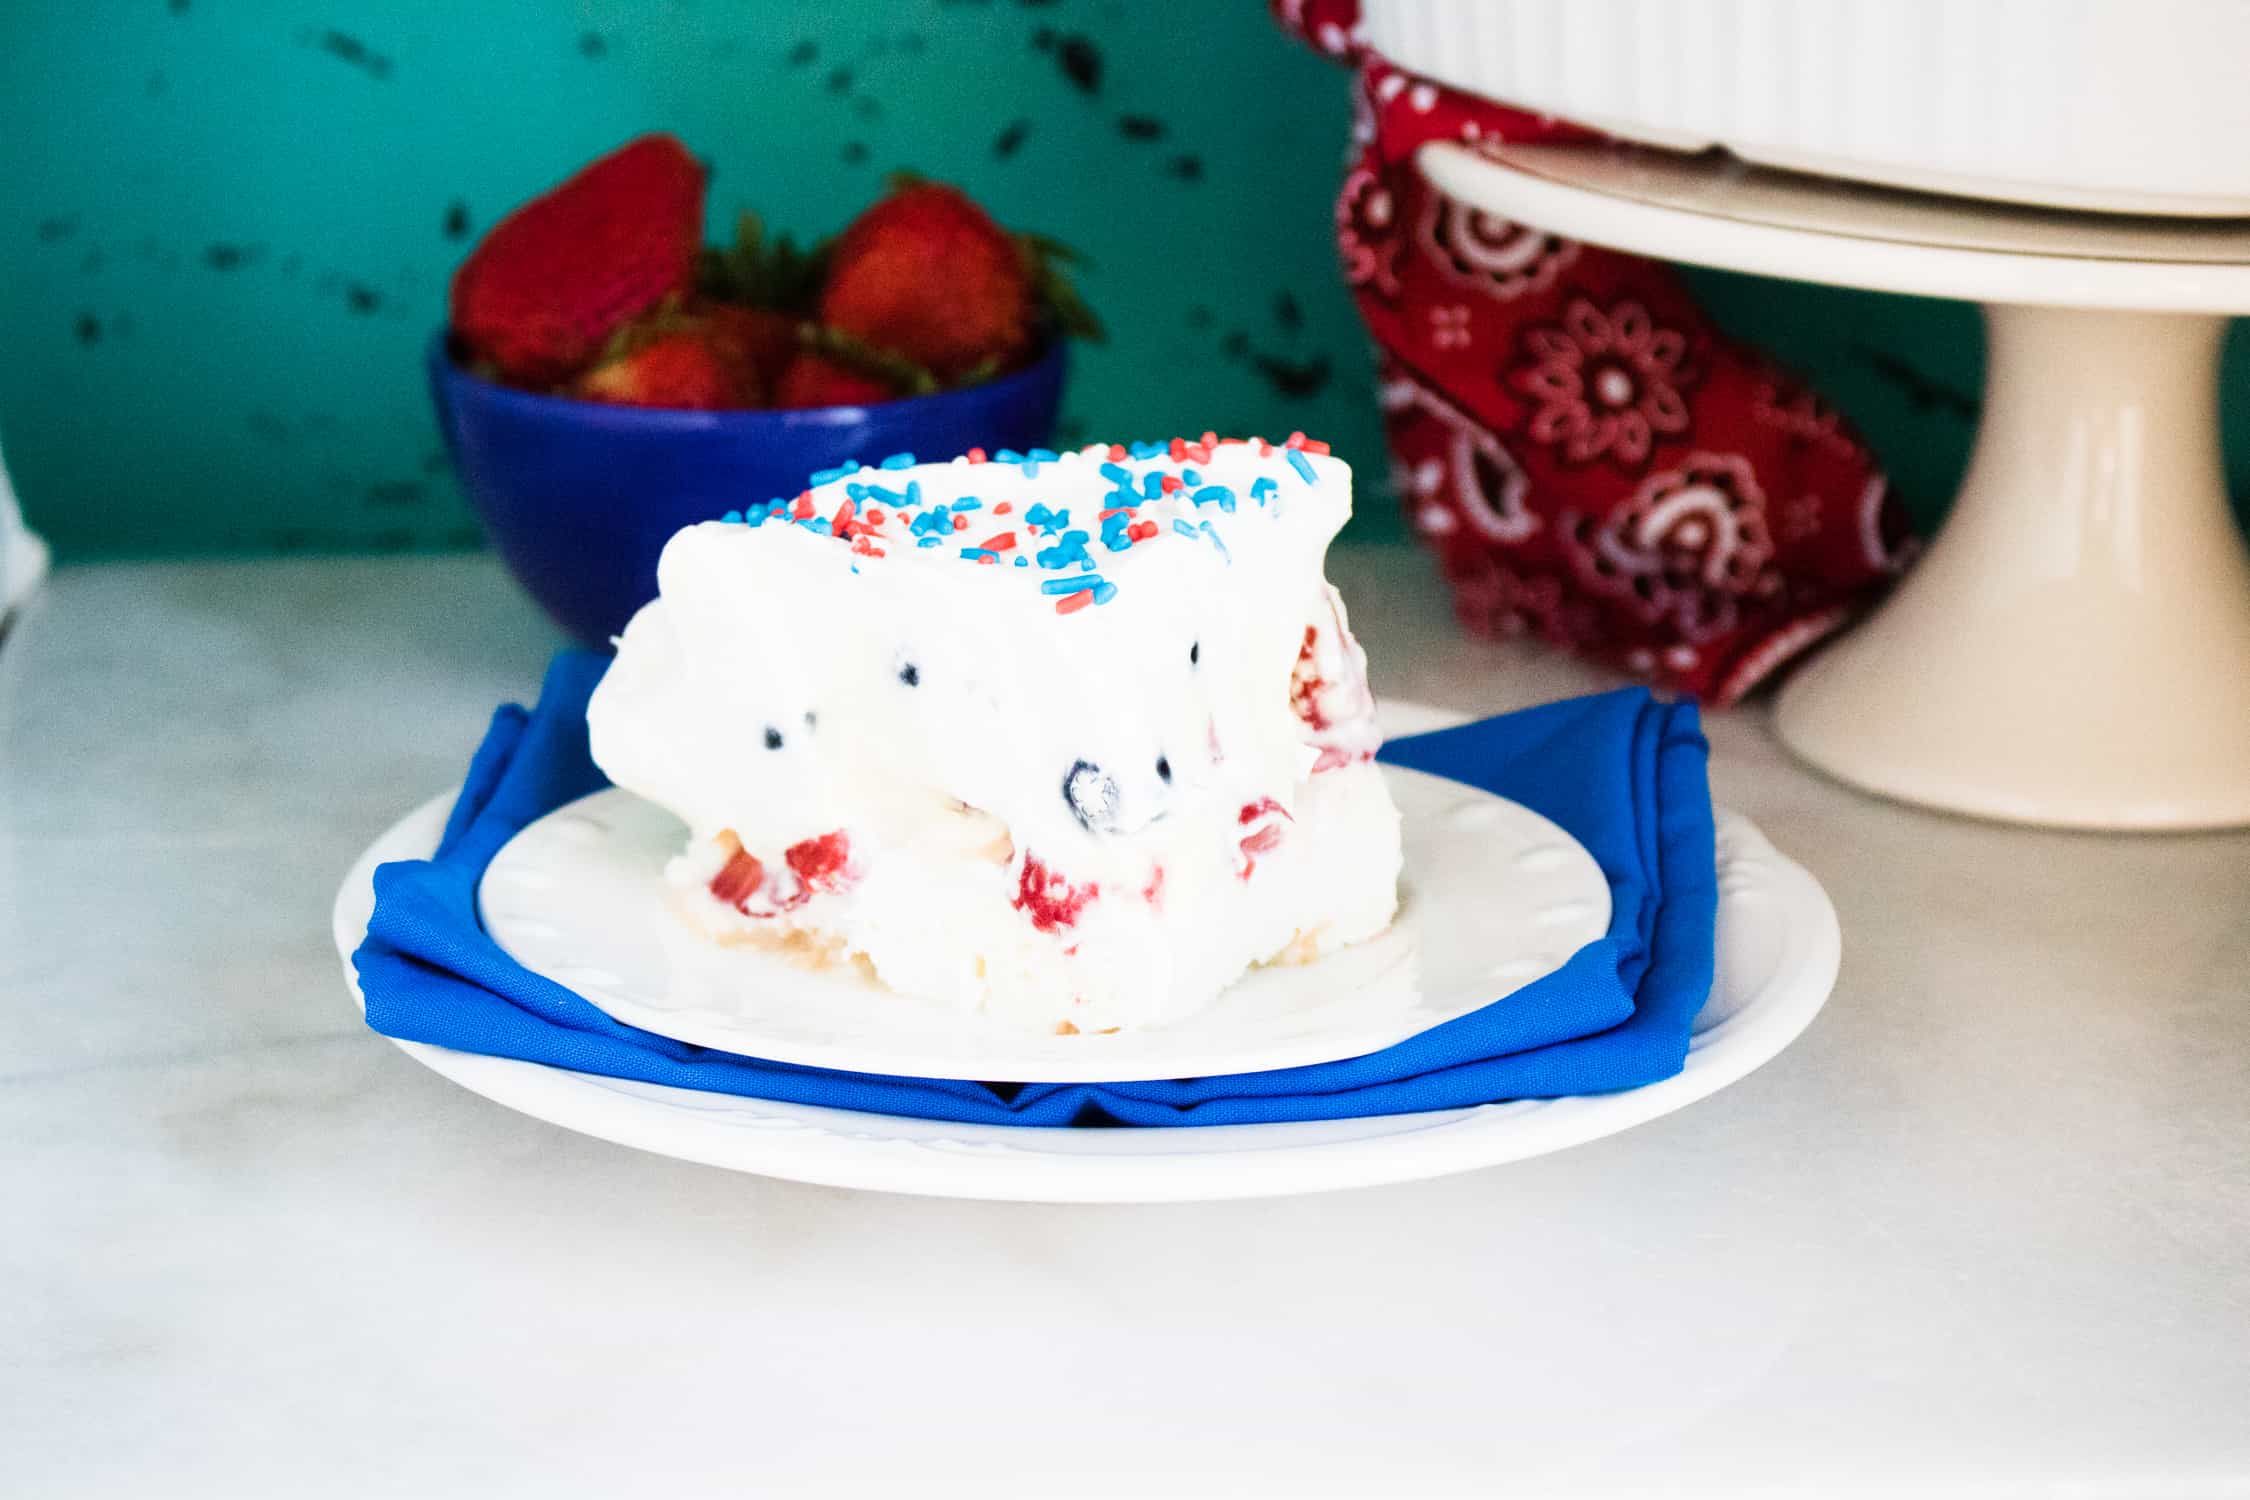 Red White & Blue Dessert Lasagna served on a plate